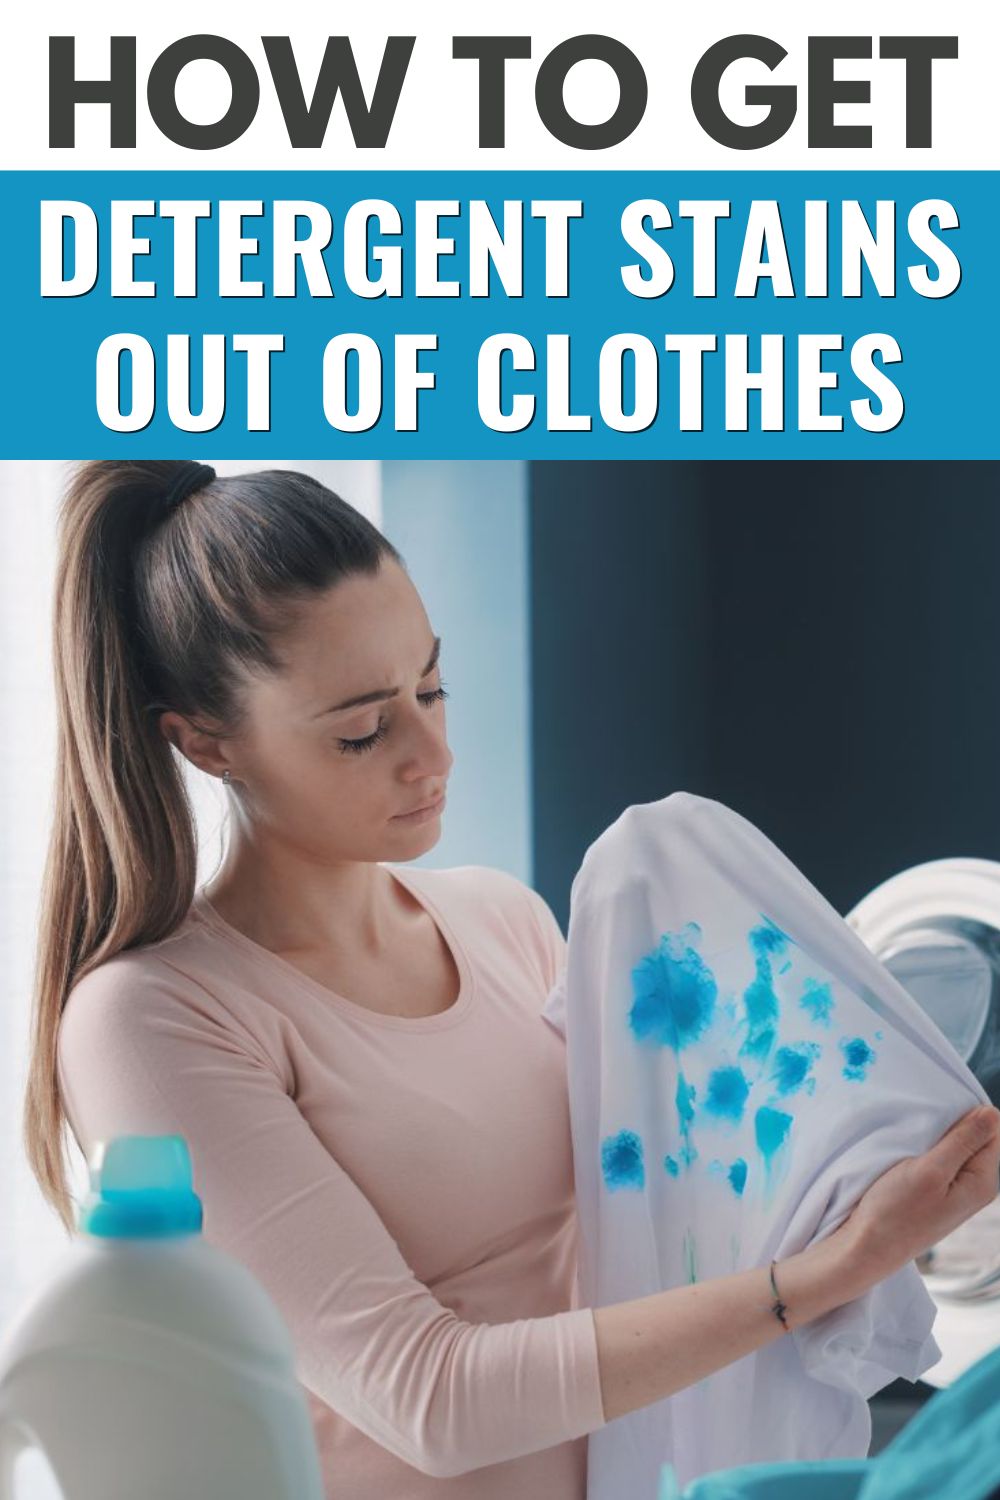 How to Get Detergent Stains Out of Clothes